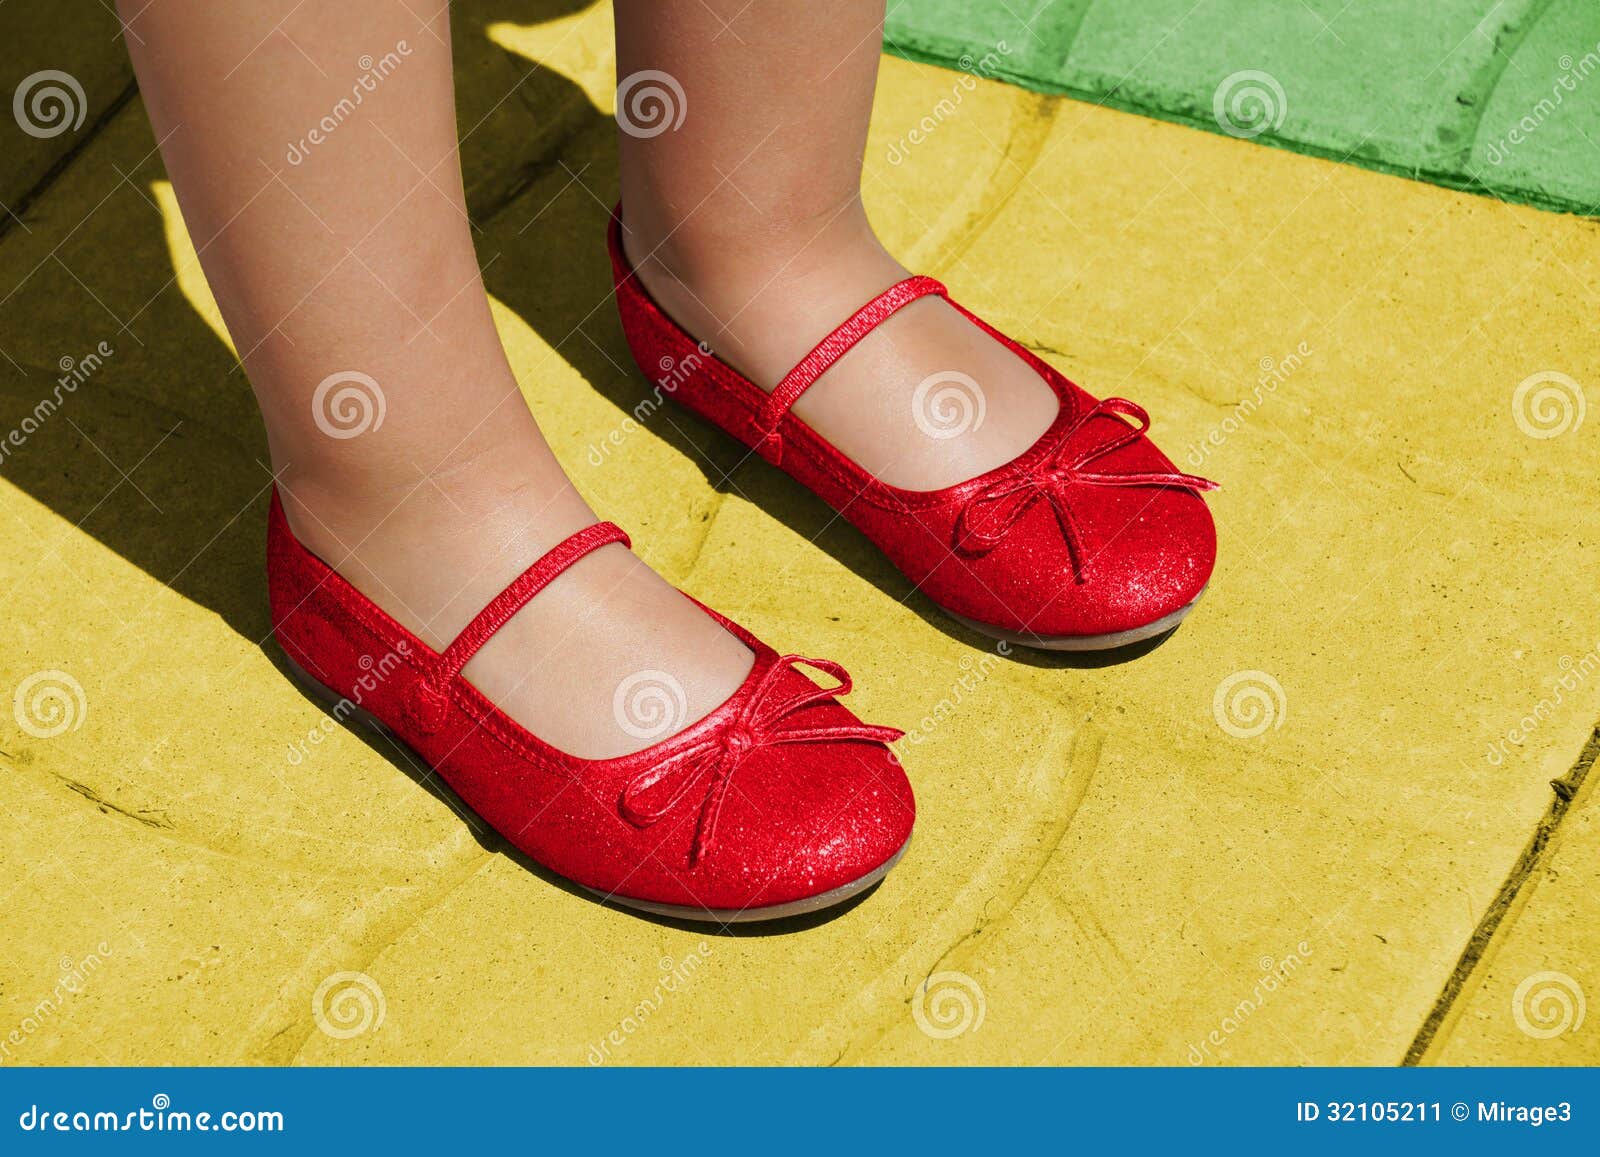 Rubis Slippers on Yellow Road Stock Image - Image of people, wizard ...